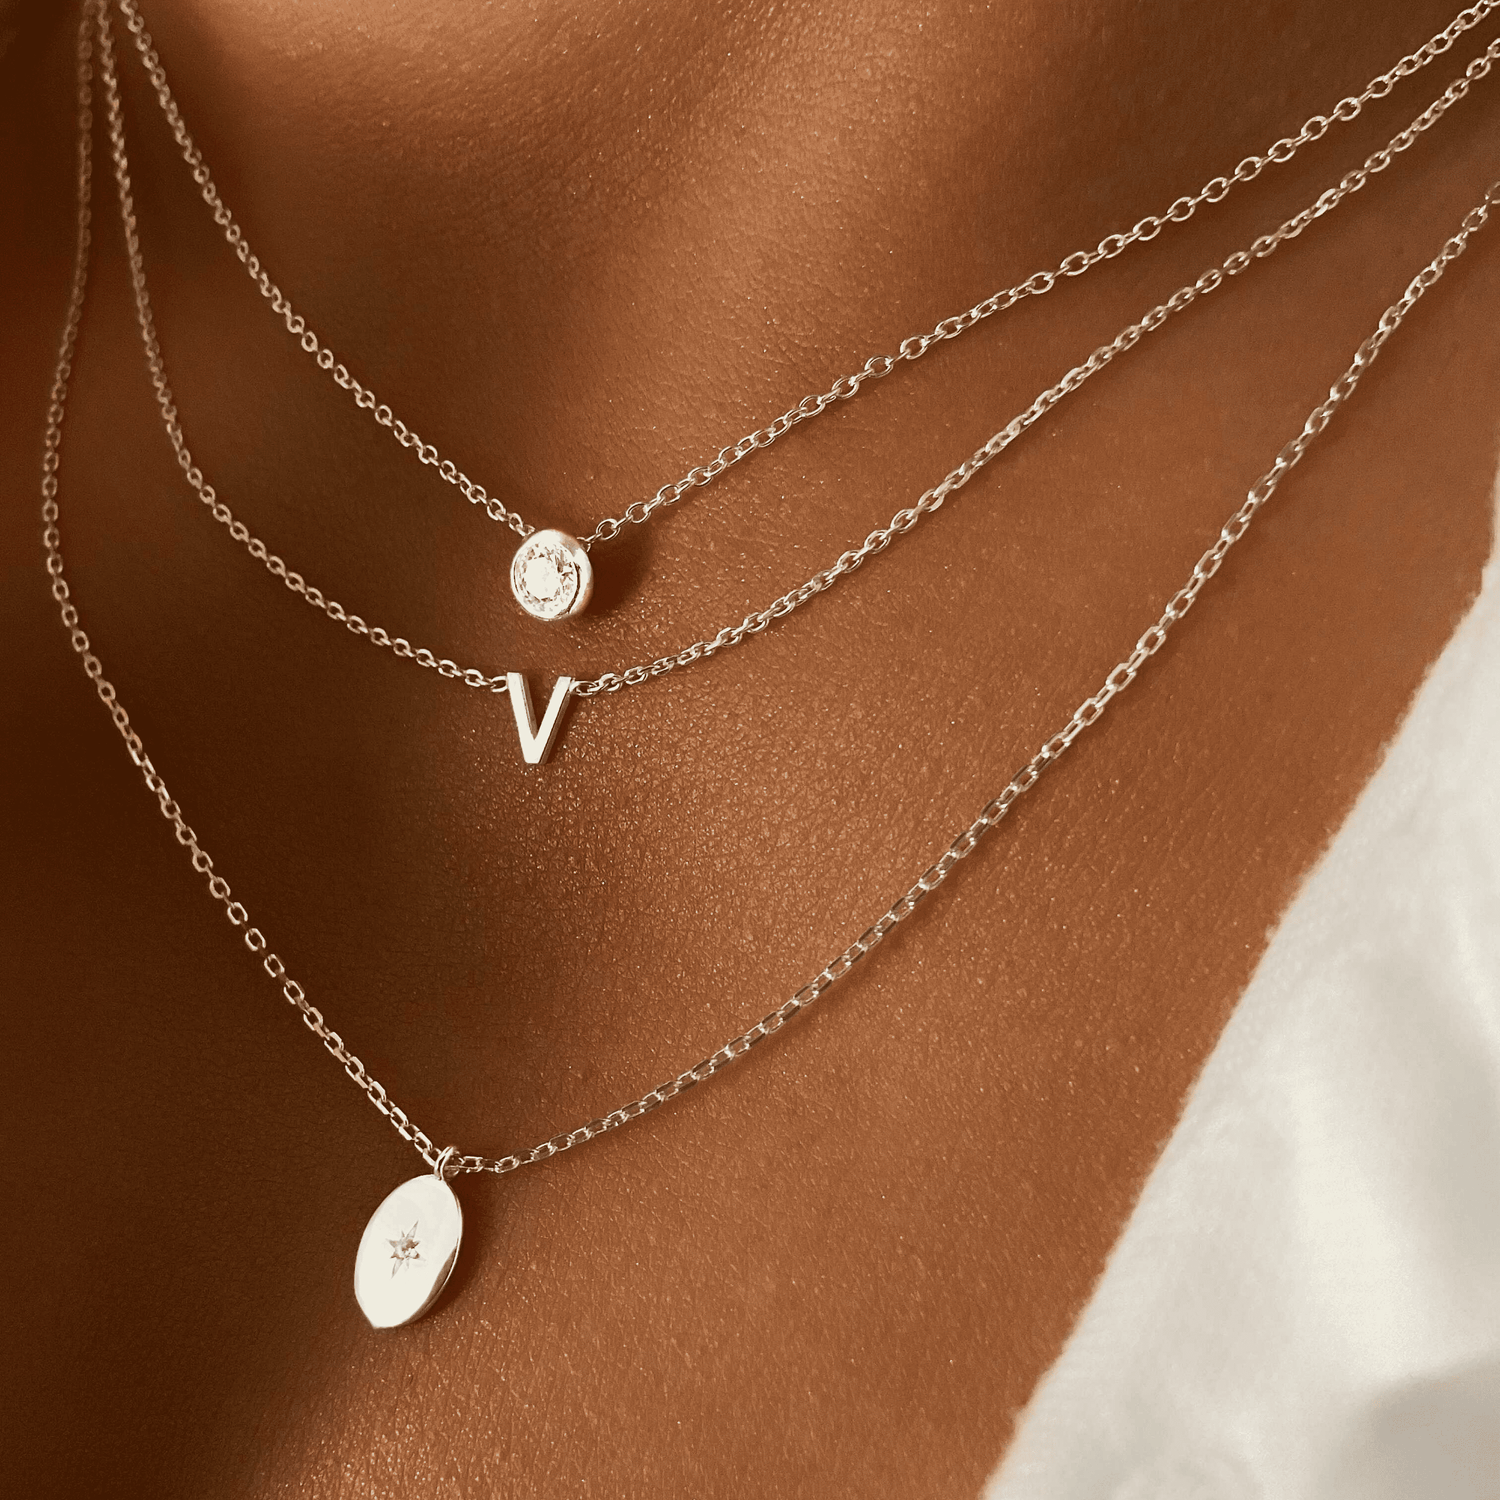 bezel solitaire diamond necklace womens jewellery, womens trendy fashion jewellery, necklace stack, necklace layering , gold and silver 